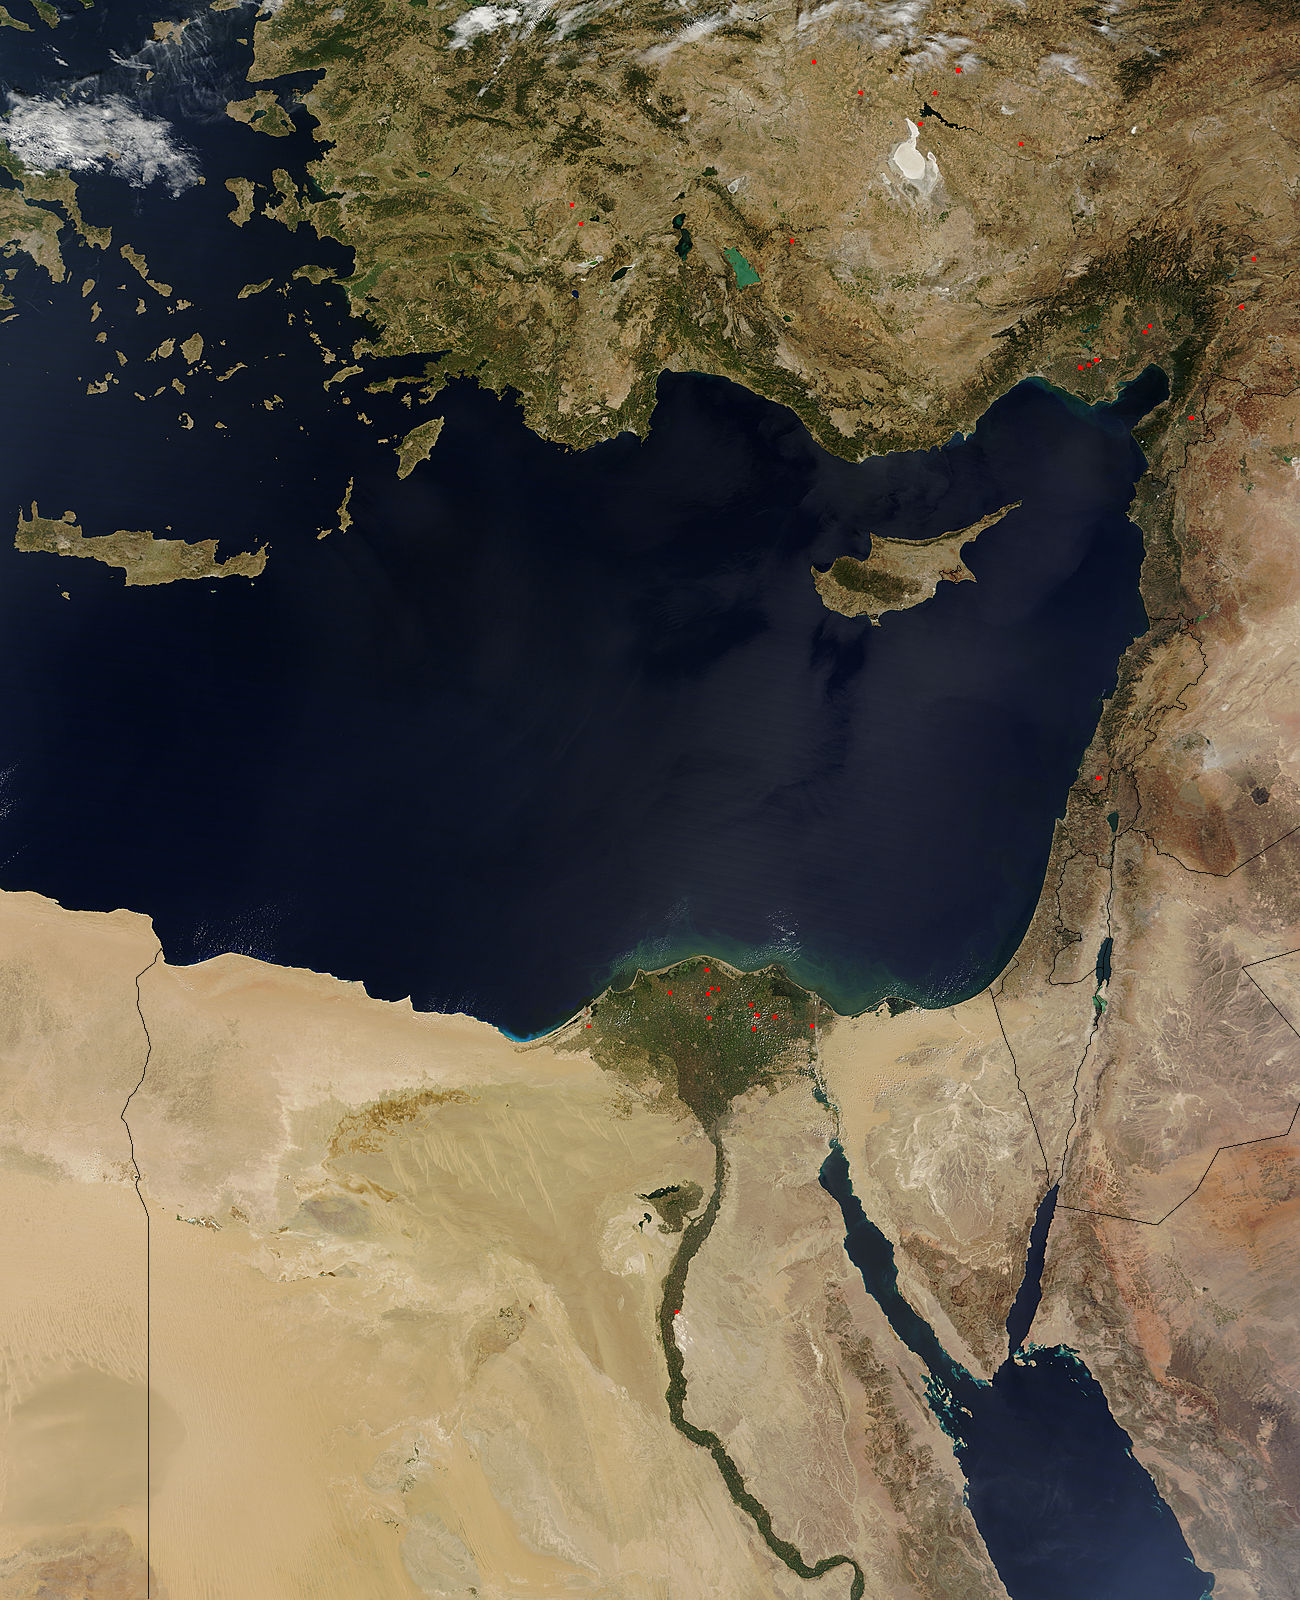 Eastern Mediterranean Sea - related image preview